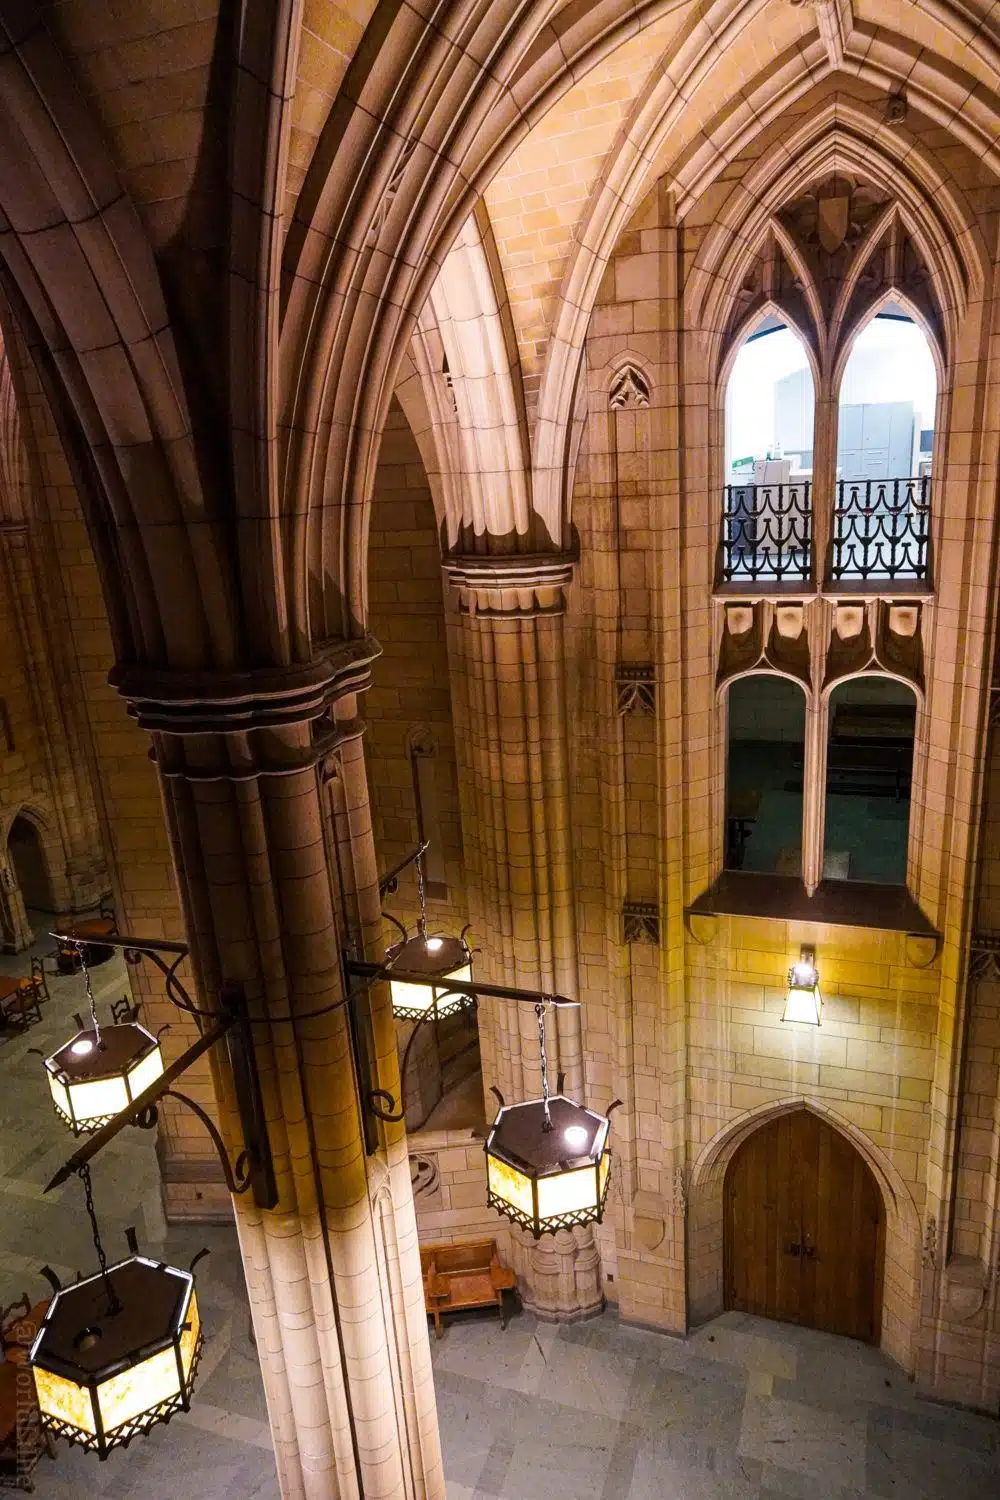 Such amazing arches in the Cathedral of Learning.